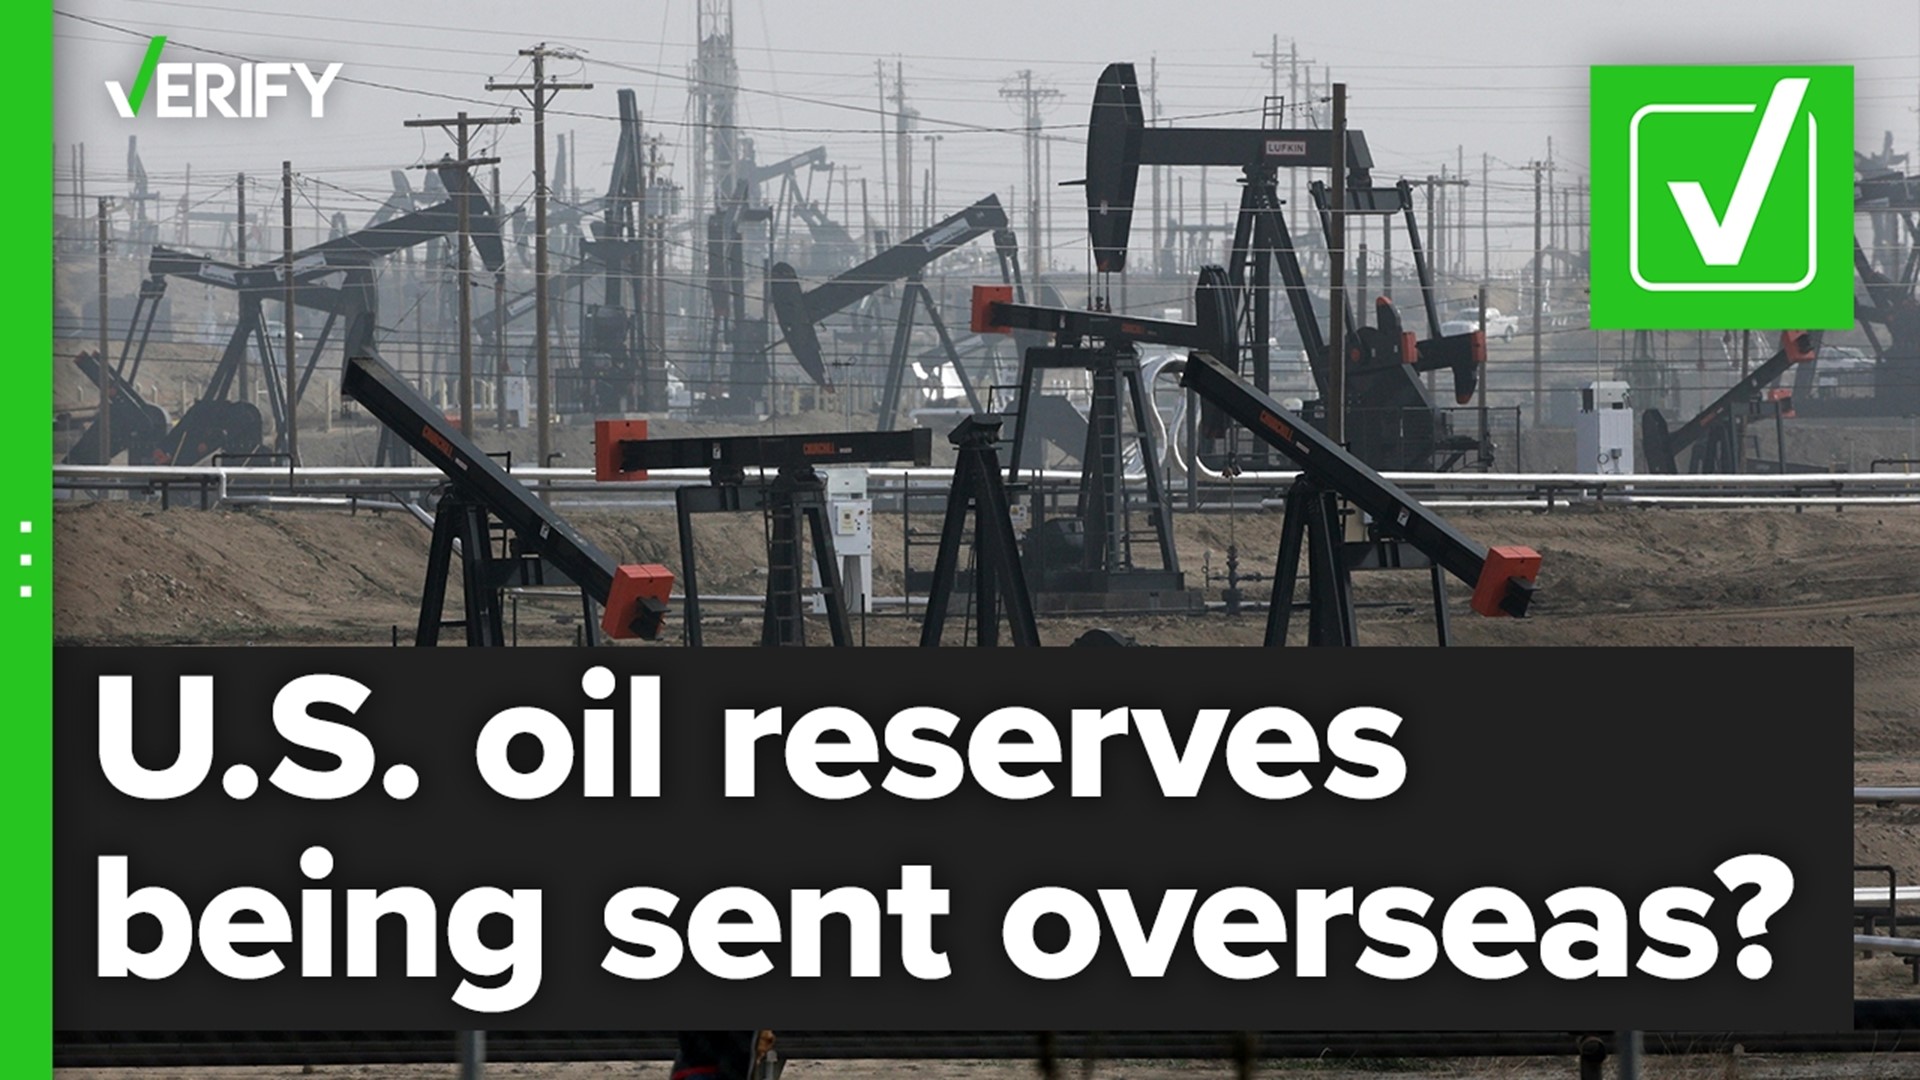 Has oil from U.S. reserves been sent to other countries? The VERIFY team confirms this is true.